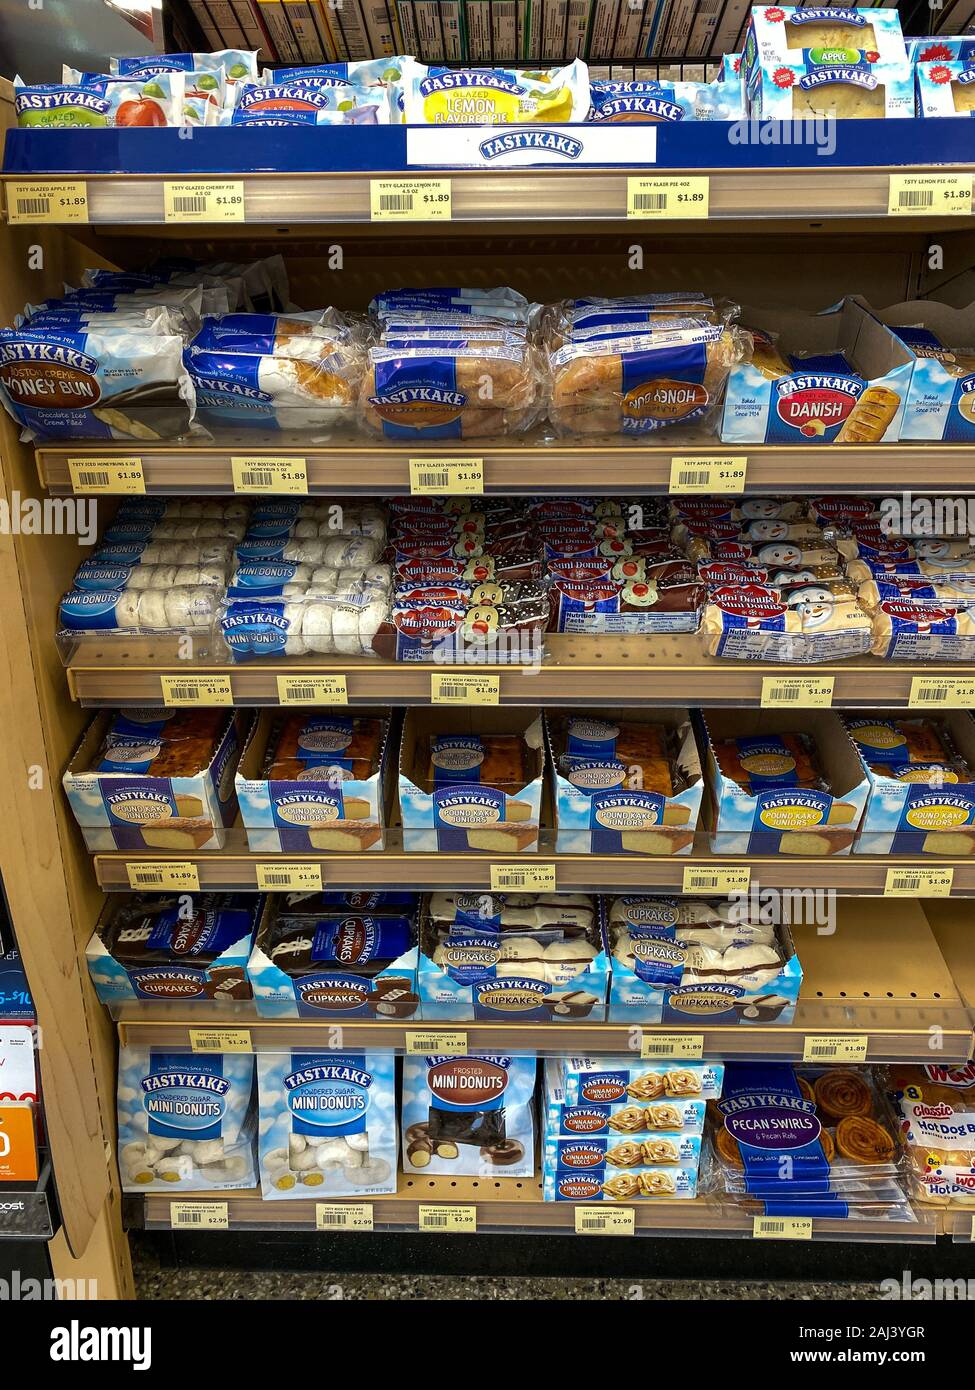 Orlando Fl Usa 12 11 19 A Display Of Tastykake Sweets At A Wawa Gas Station Fast Food Restaurant And Convenience Store Stock Photo Alamy